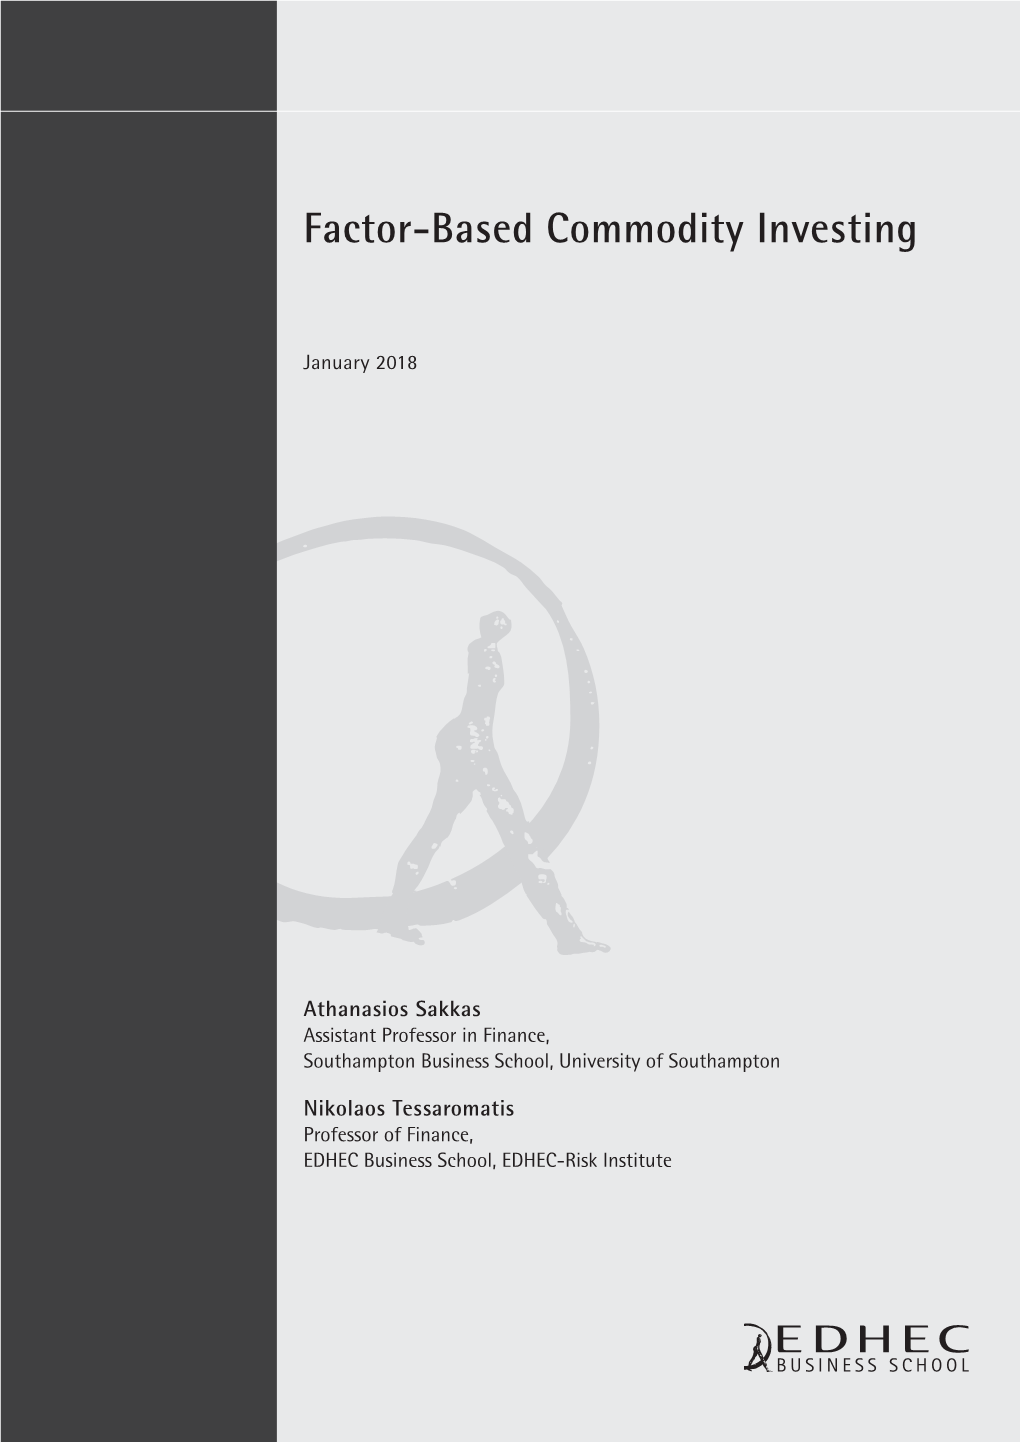 Factor-Based Commodity Investing